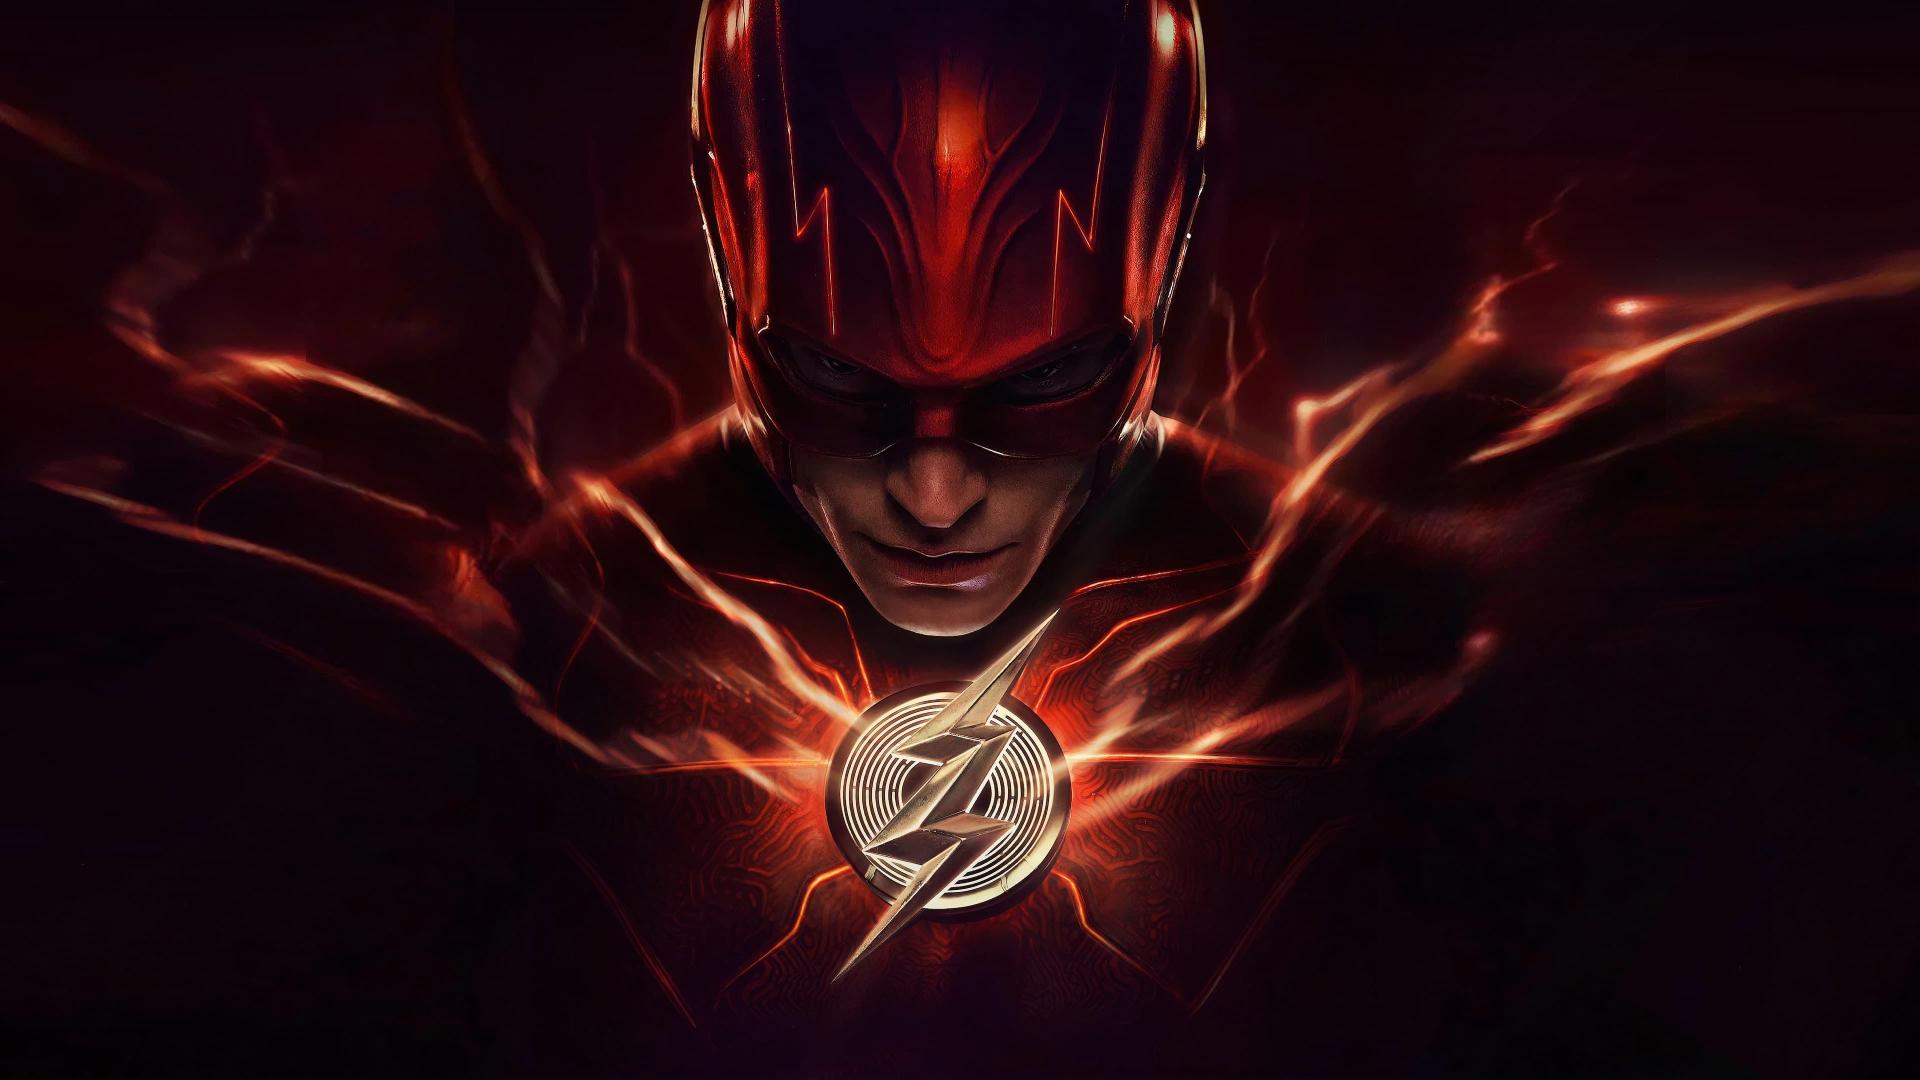 The Curious Case of Ridiculous CGI: Why The Flash Tanked at the Box Office